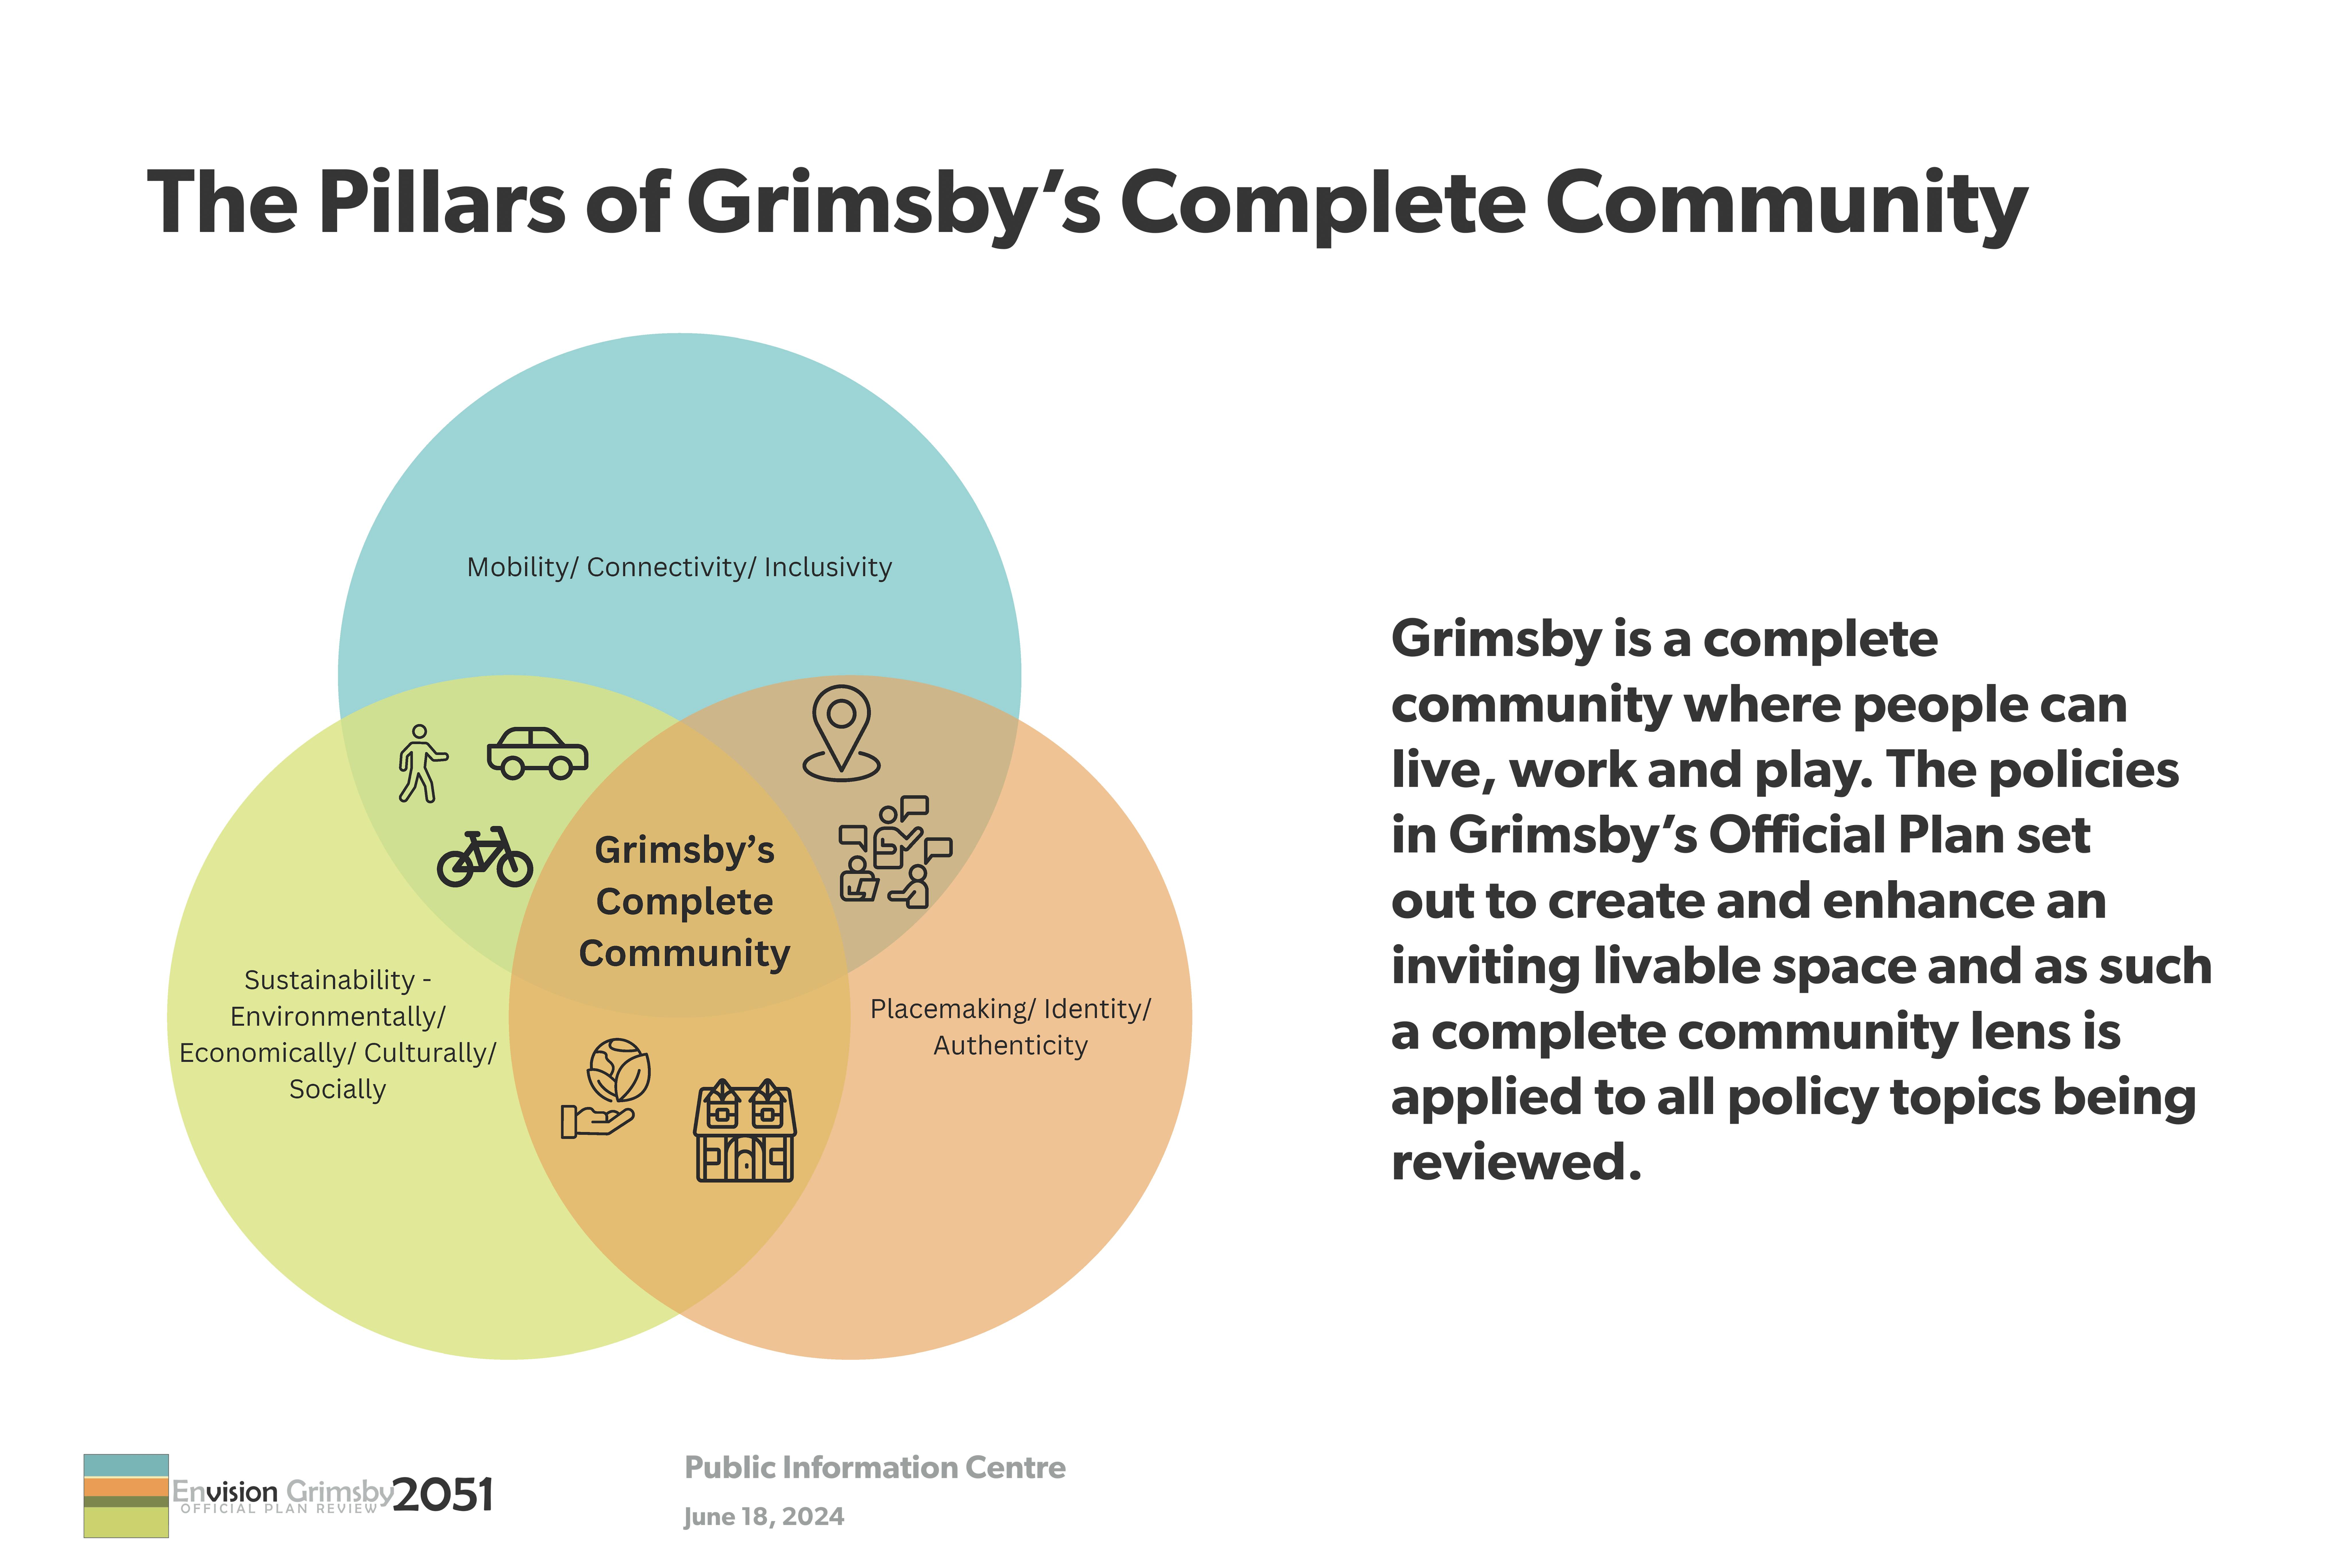 The Pillars of Grimsby's Complete Community